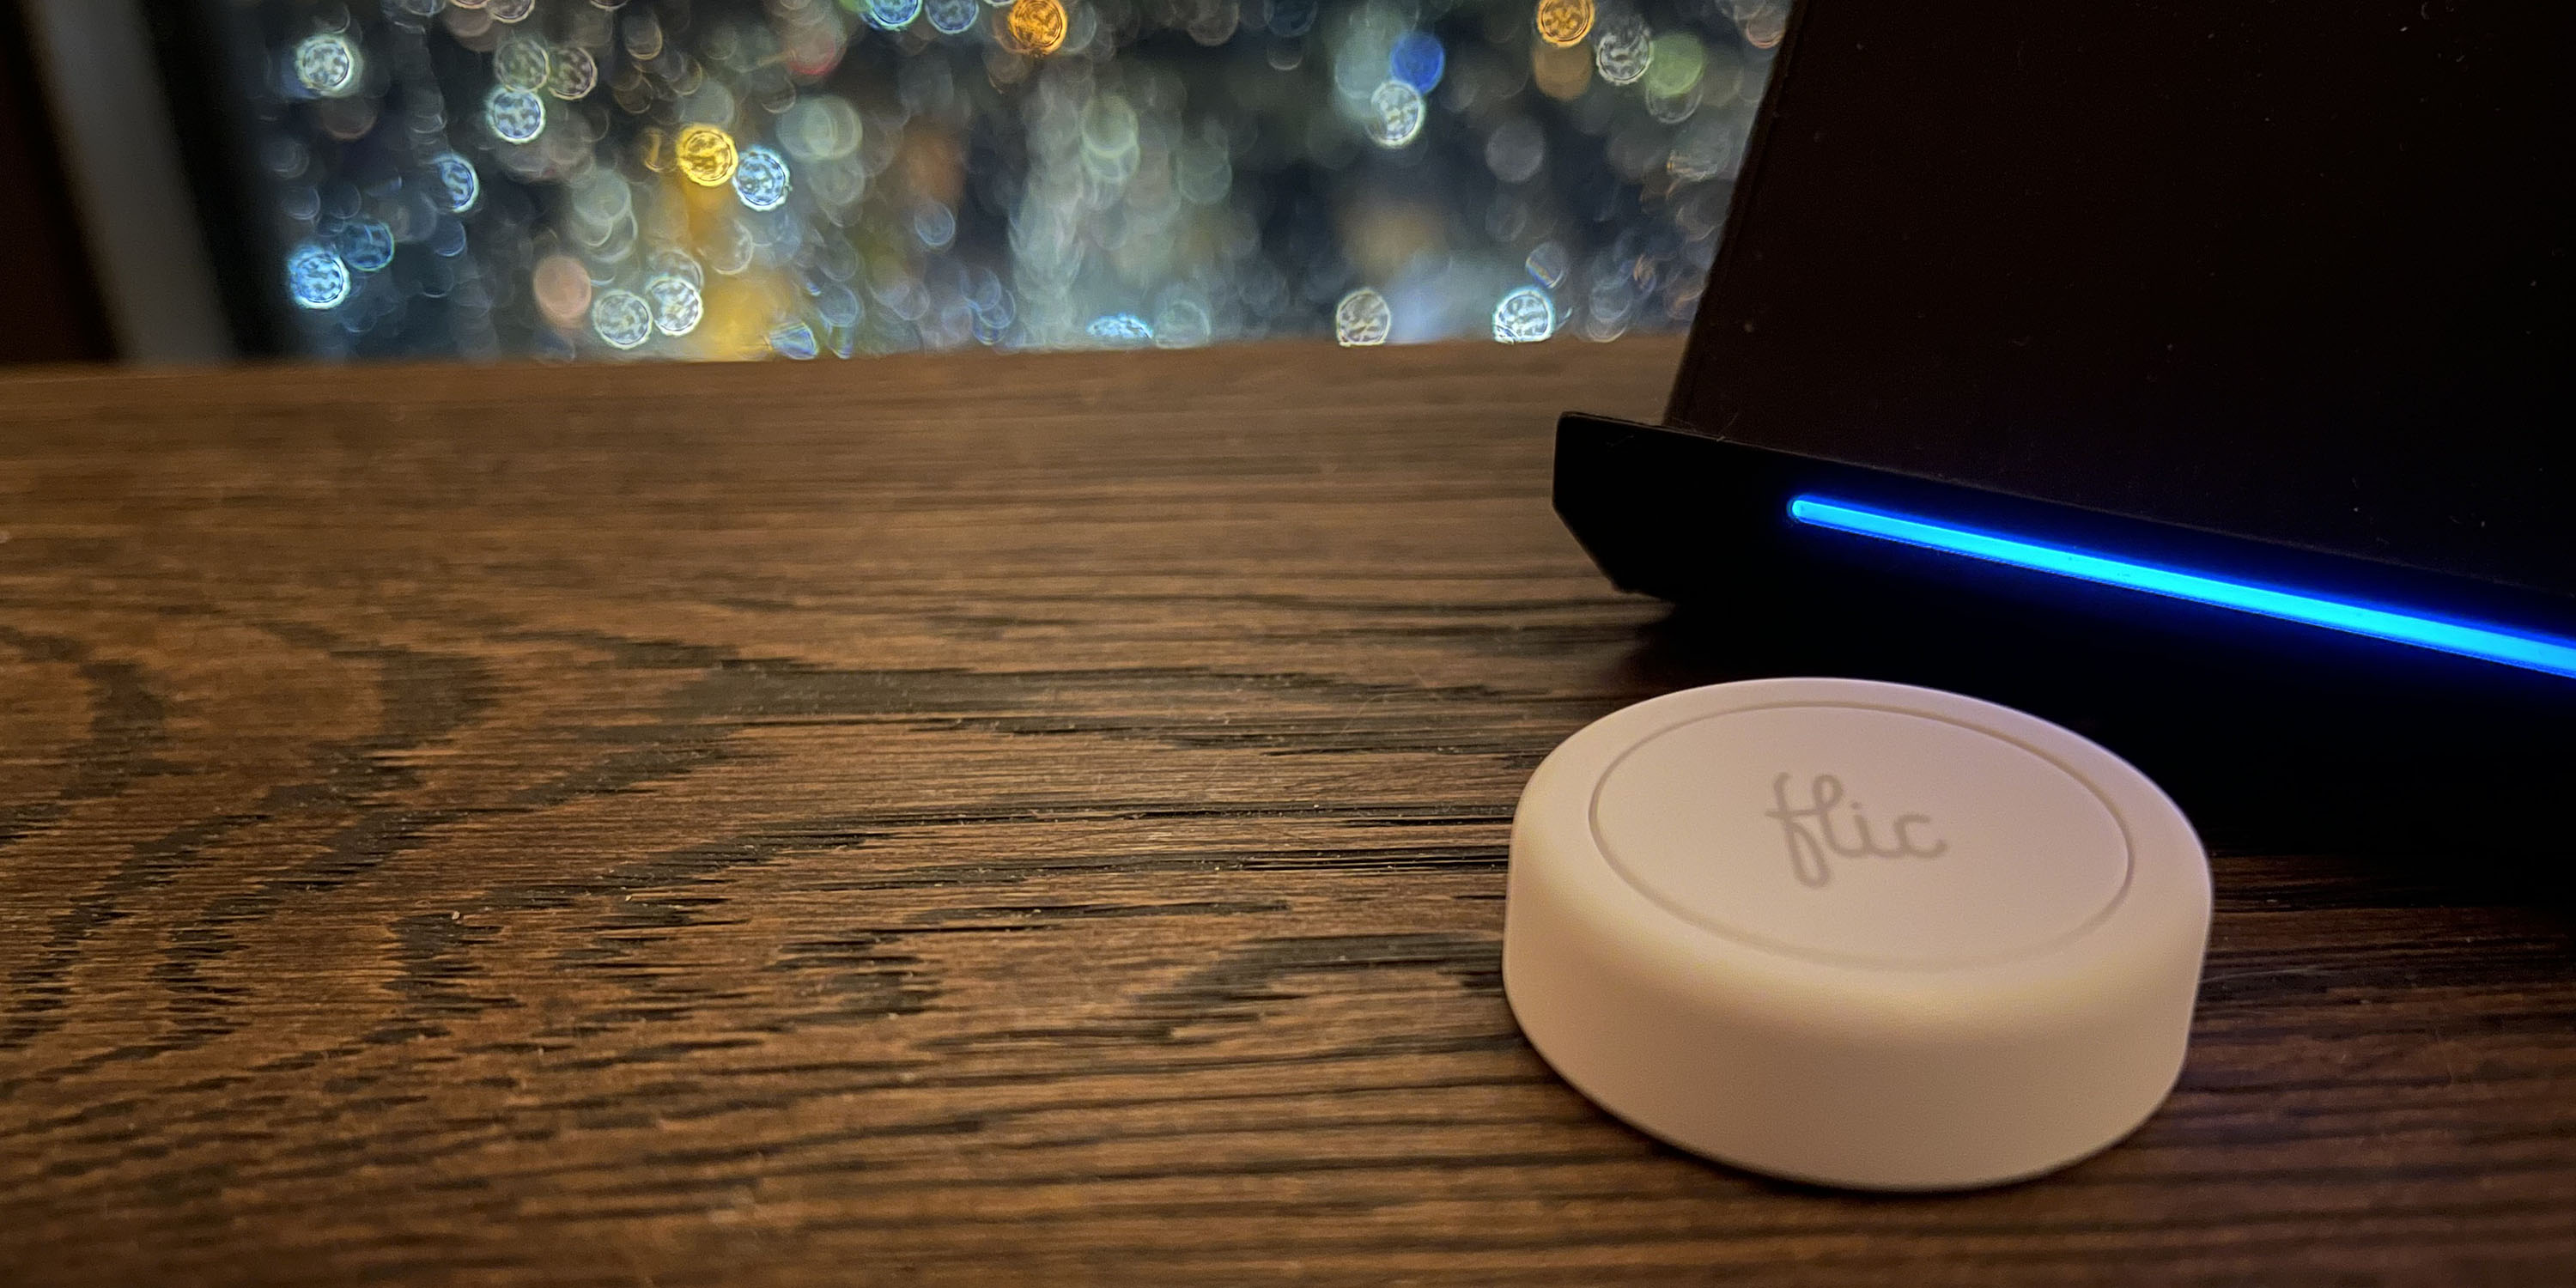 HomeKit-compatible smart buttons are kind of addictive (Flic 2) - 9to5Mac